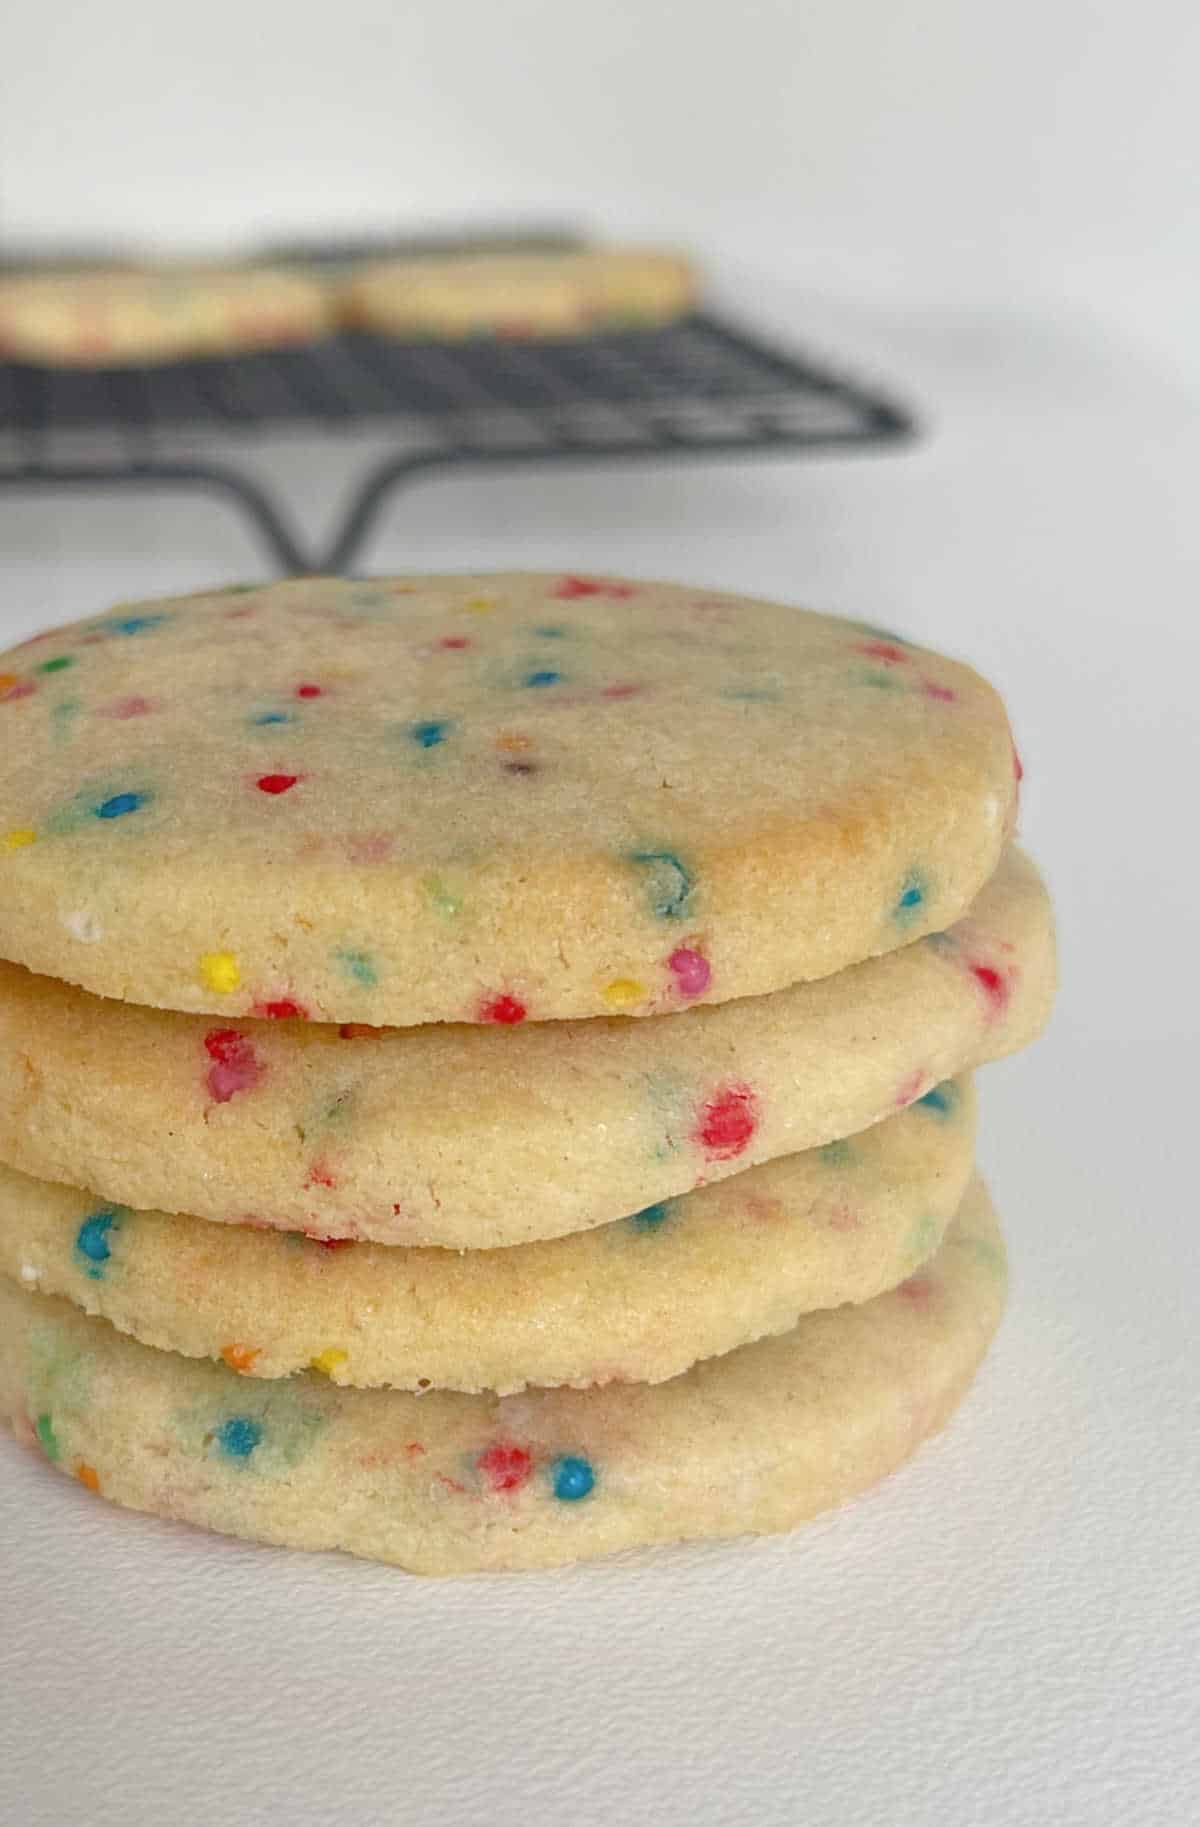 Sugar cookies with 100s and 1000s added stacked on top of each other.